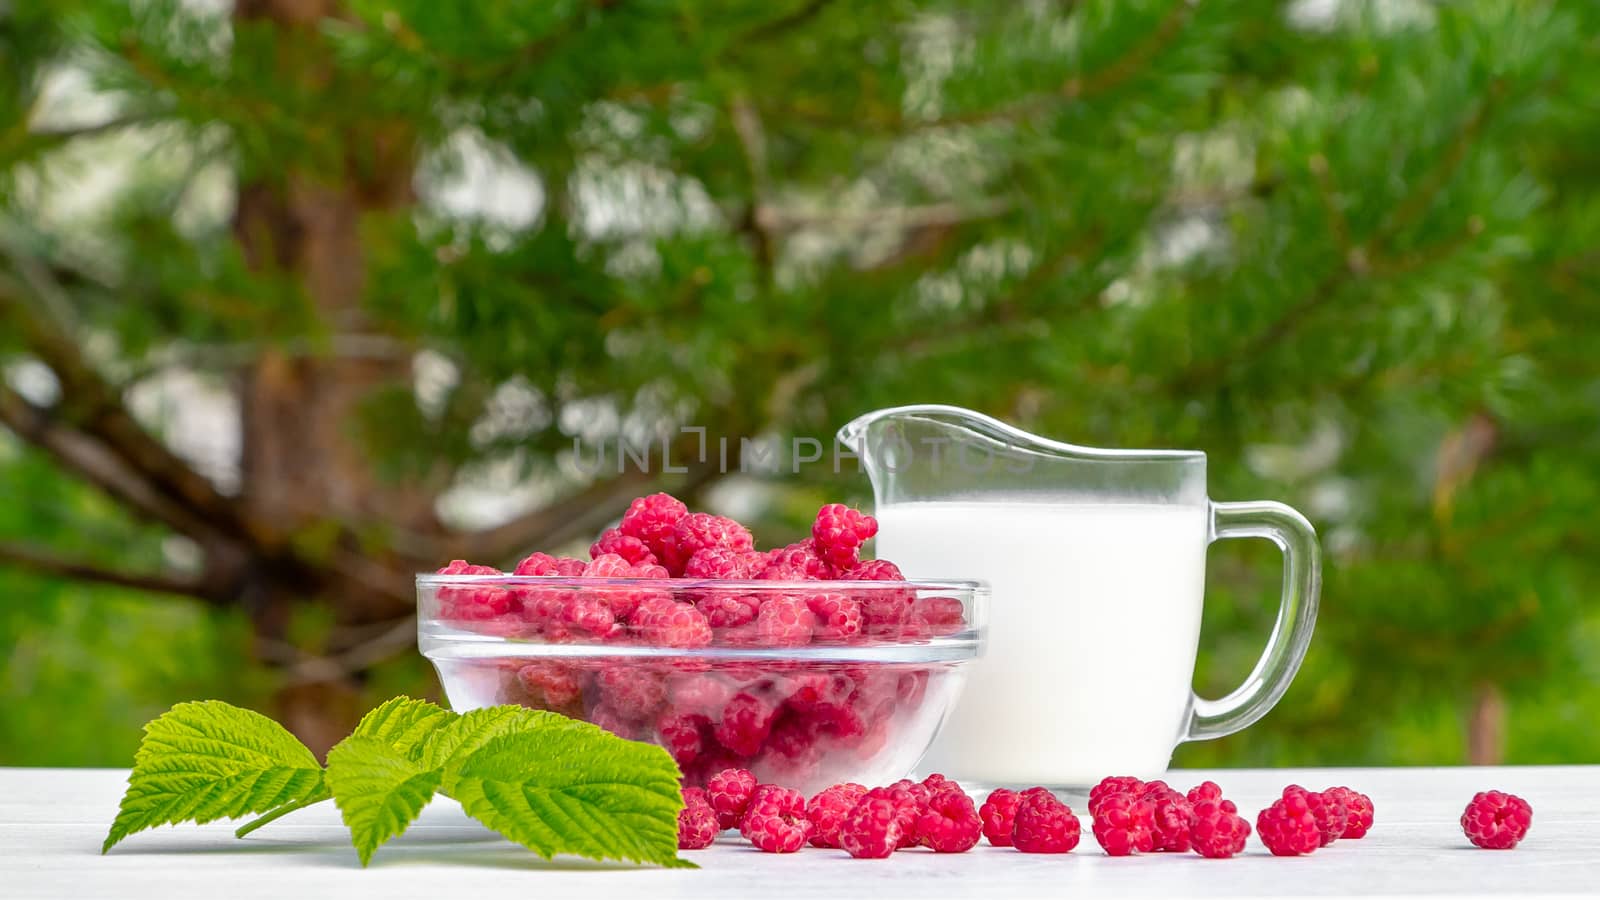 Fresh raspberries in a glass bowl and natural iogurt on a white wooden table against a green background. Concept of healthy organic nutrition by galsand